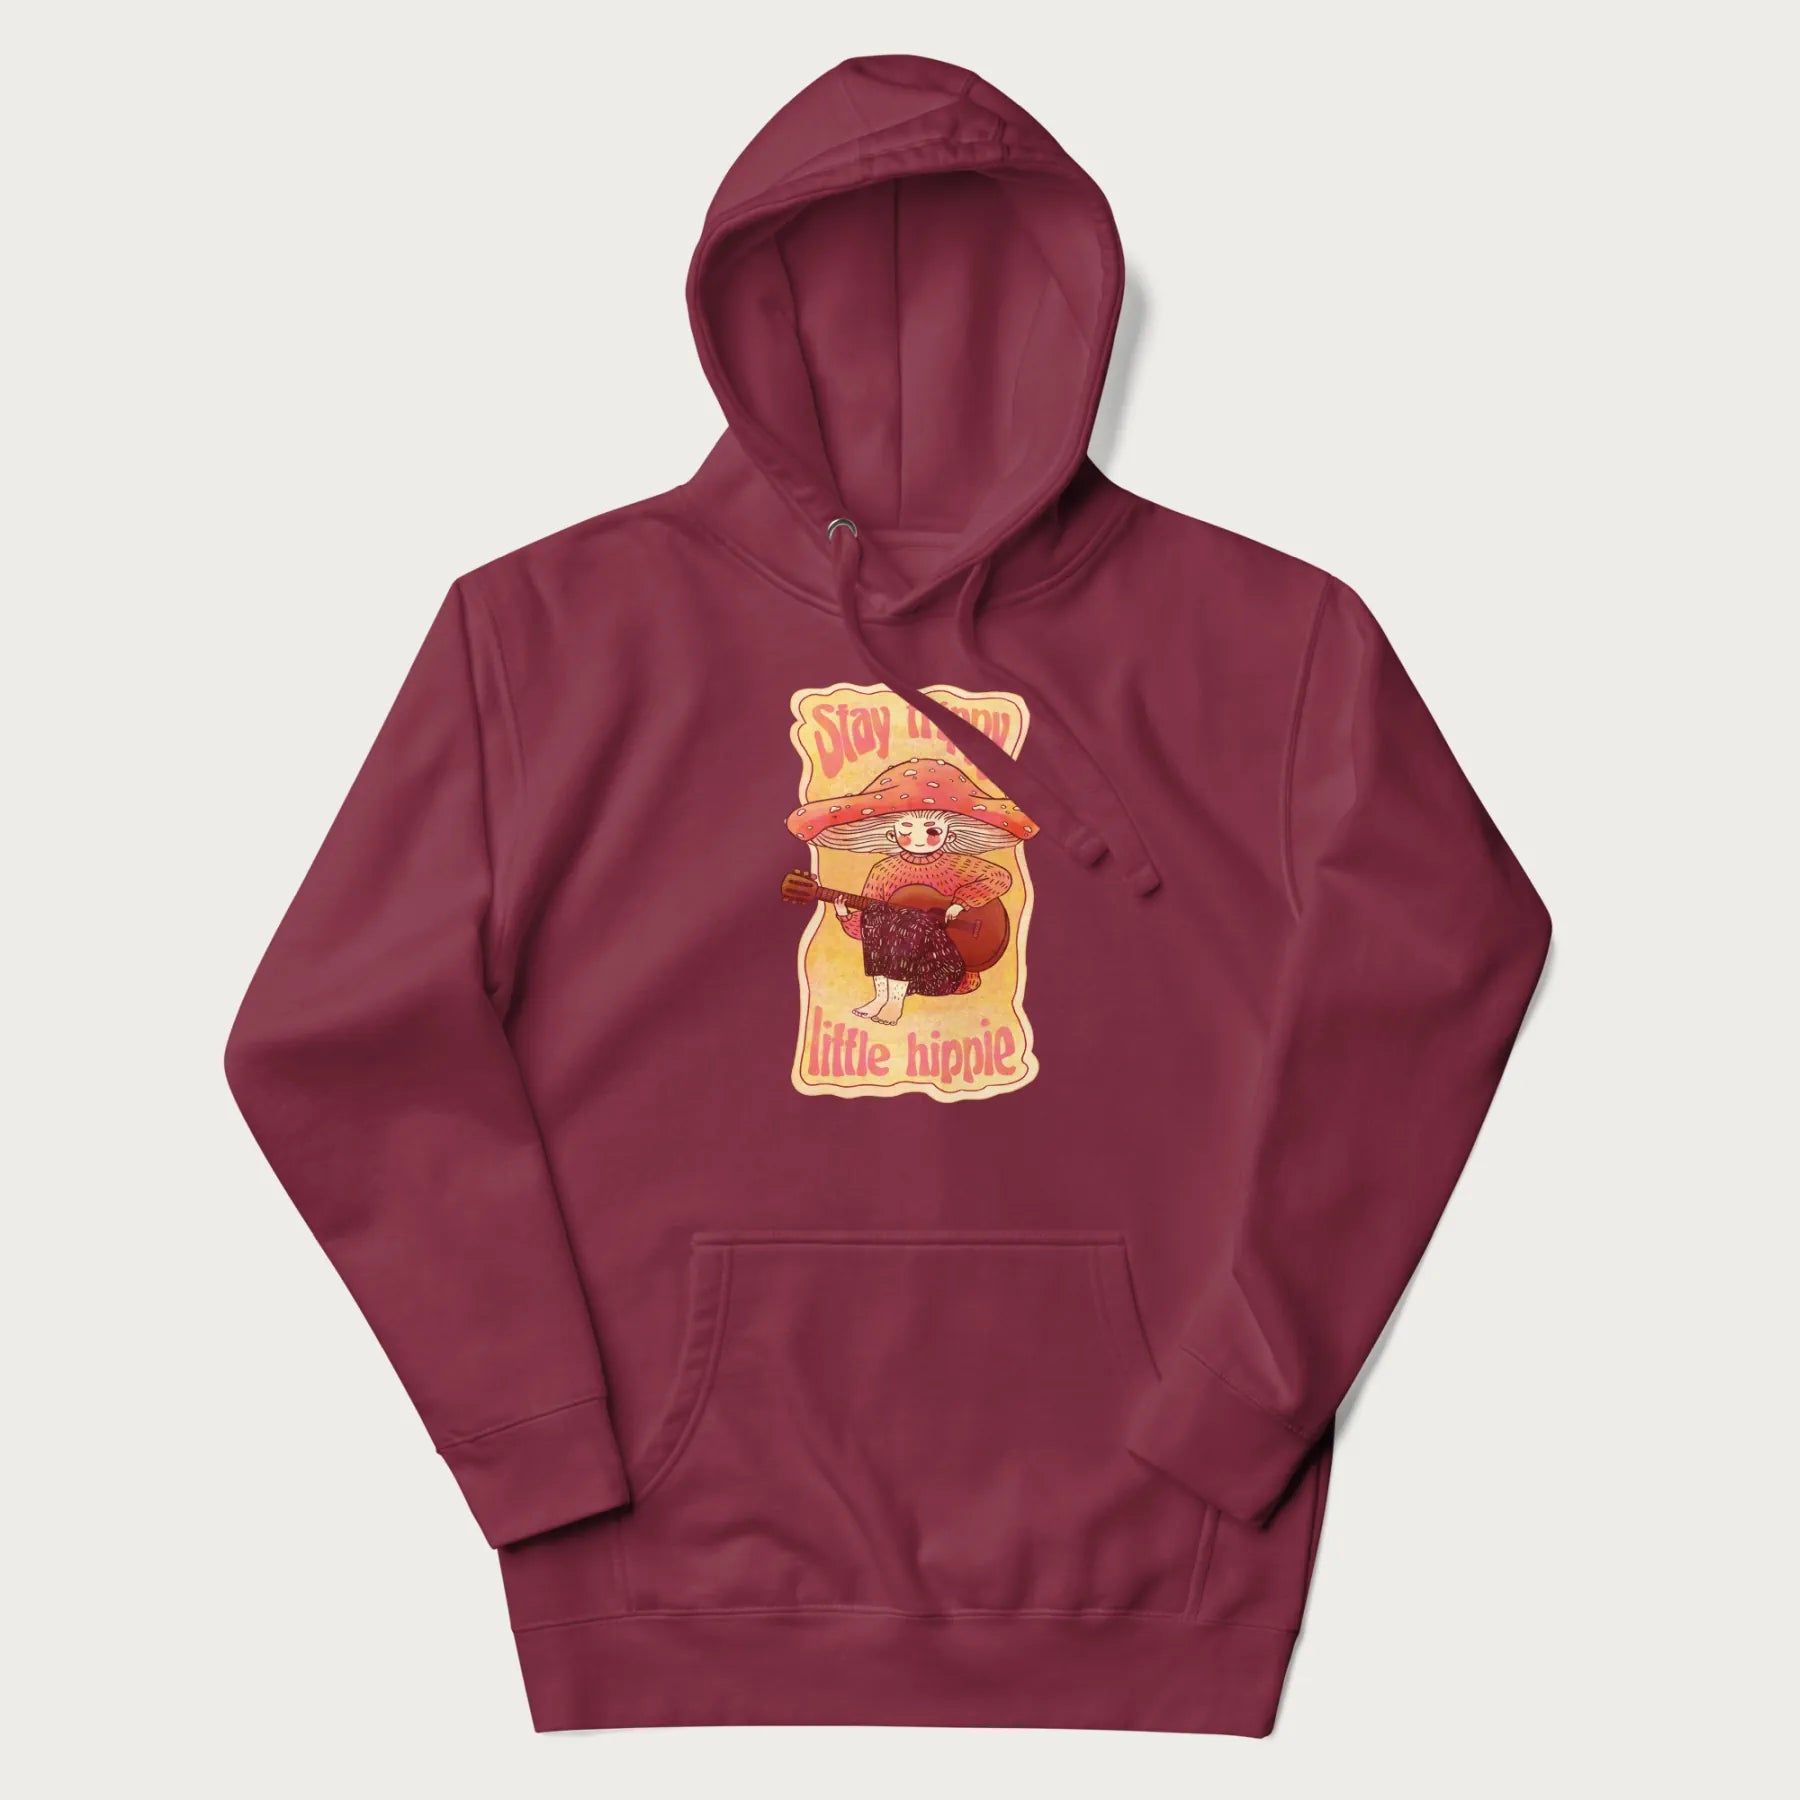 Maroon hoodie with a graphic of a character with a mushroom cap playing a guitar and the text 'Stay Trippy Little Hippie.'